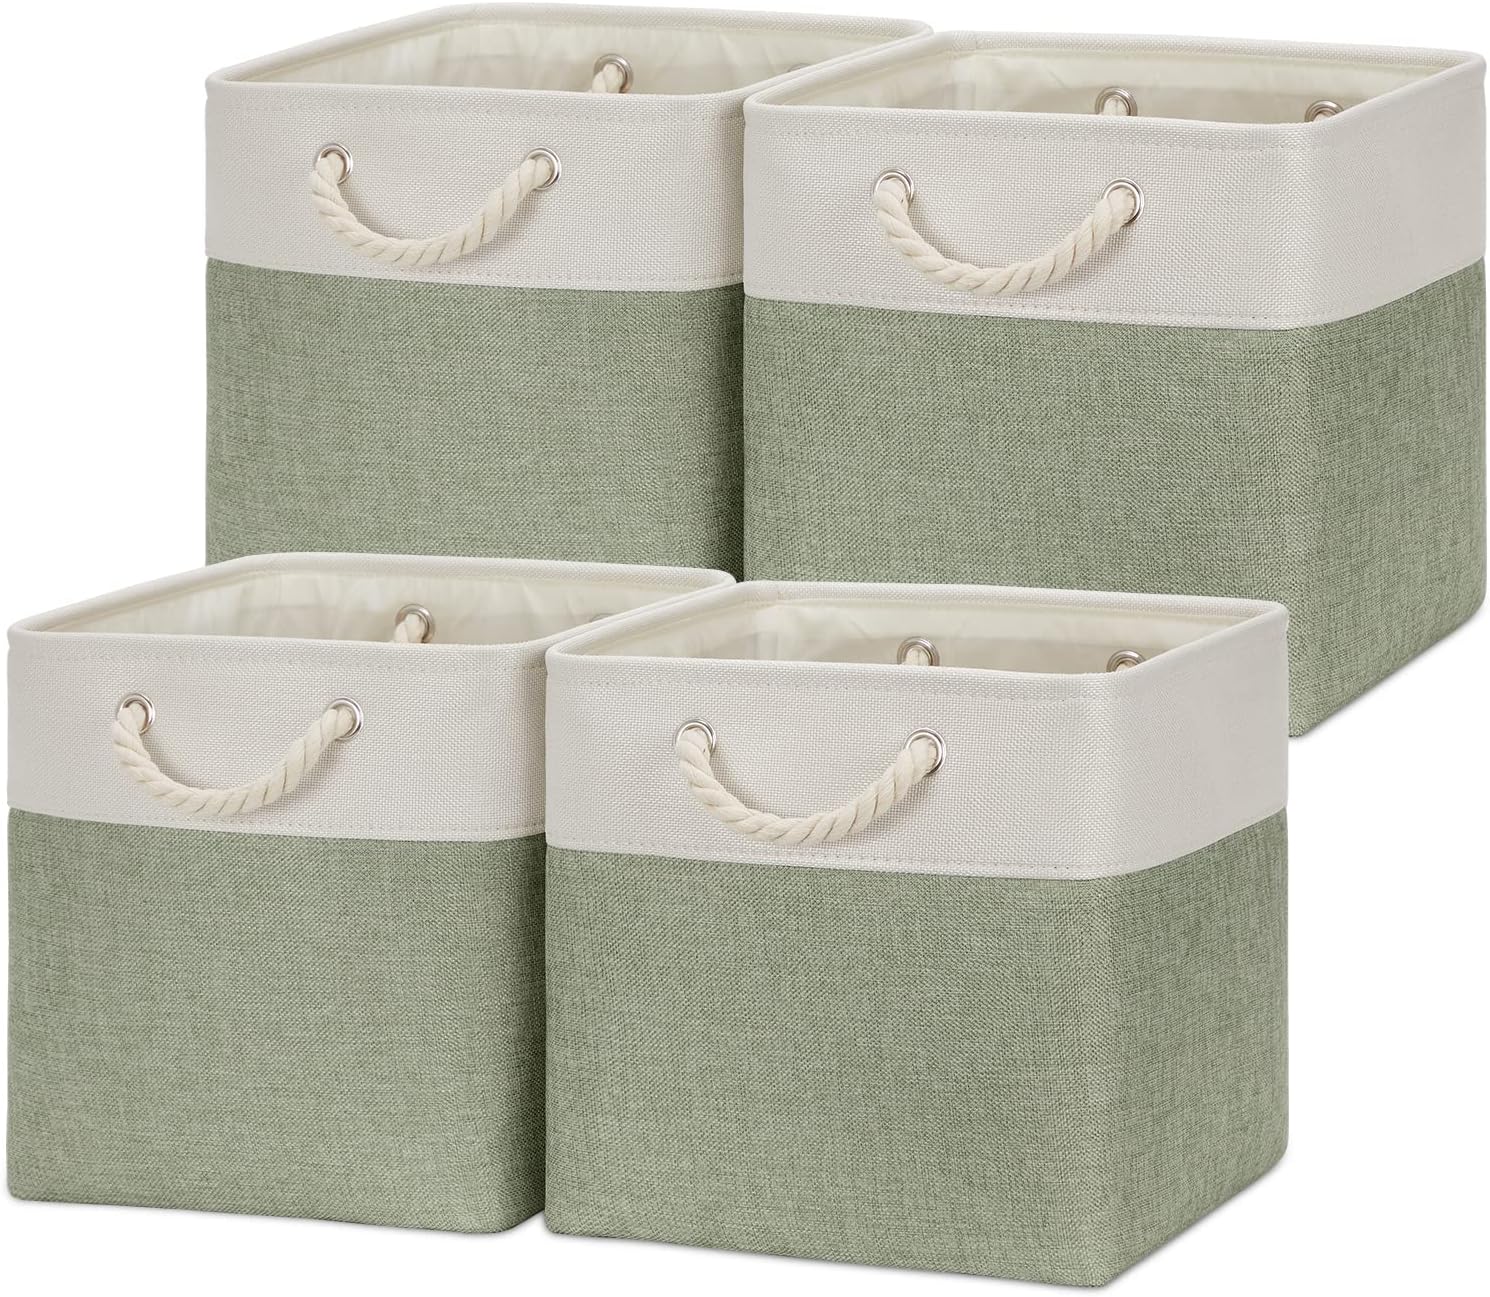 Temary Cube Storage Baskets for Shelves 12 Inch Storage Cubes 4pack Fabric Storage Baskets for Organizing Toys, Clothes, Closet Baskets with Rope Handles for Nursery Home (White&Green)